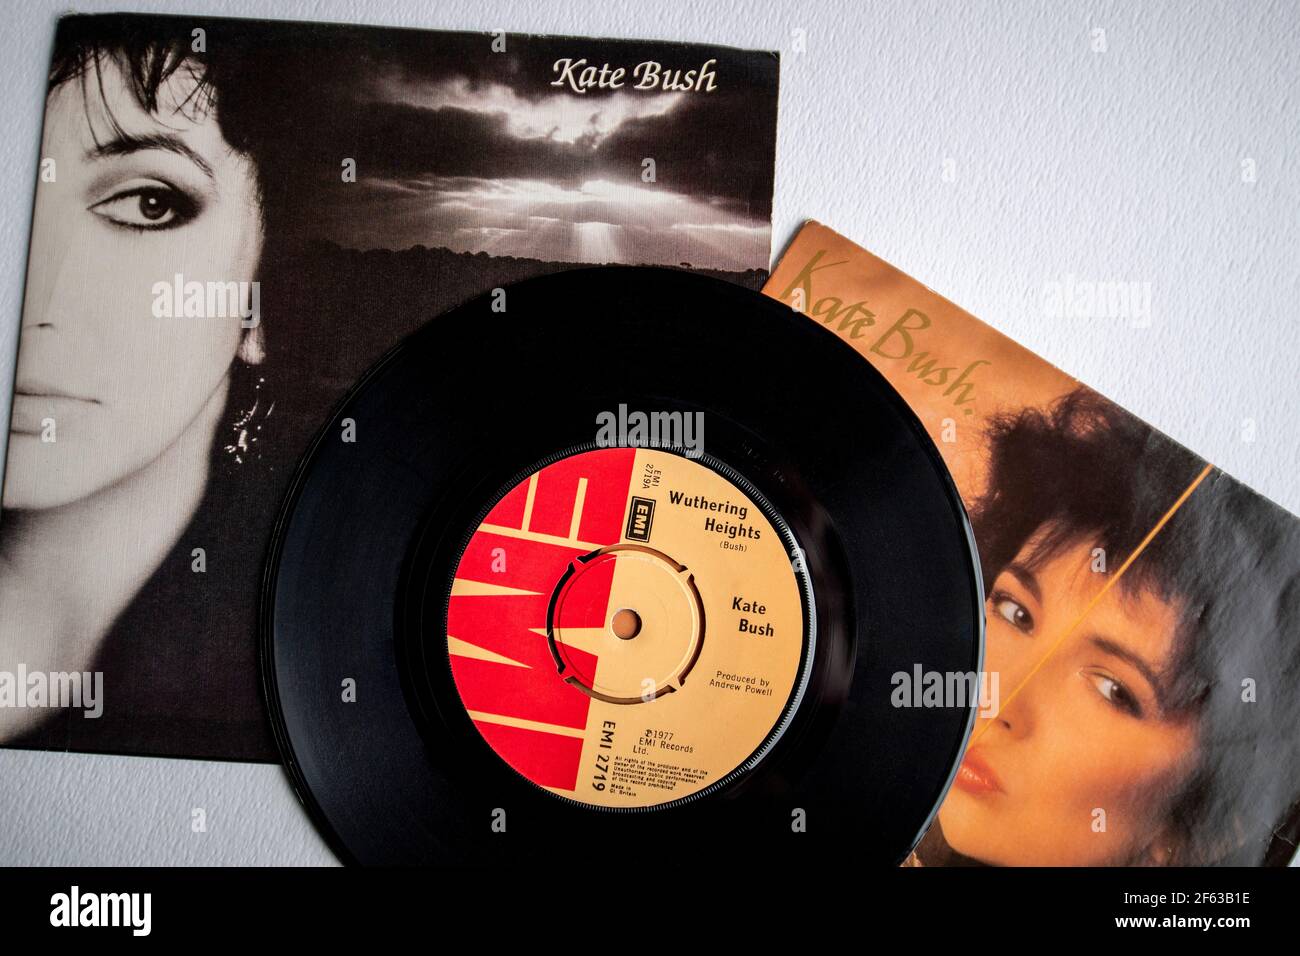 assistent Derbeville test diamant Kate Bush singles on vinyl, including a copy of Wuthering Heights Stock  Photo - Alamy